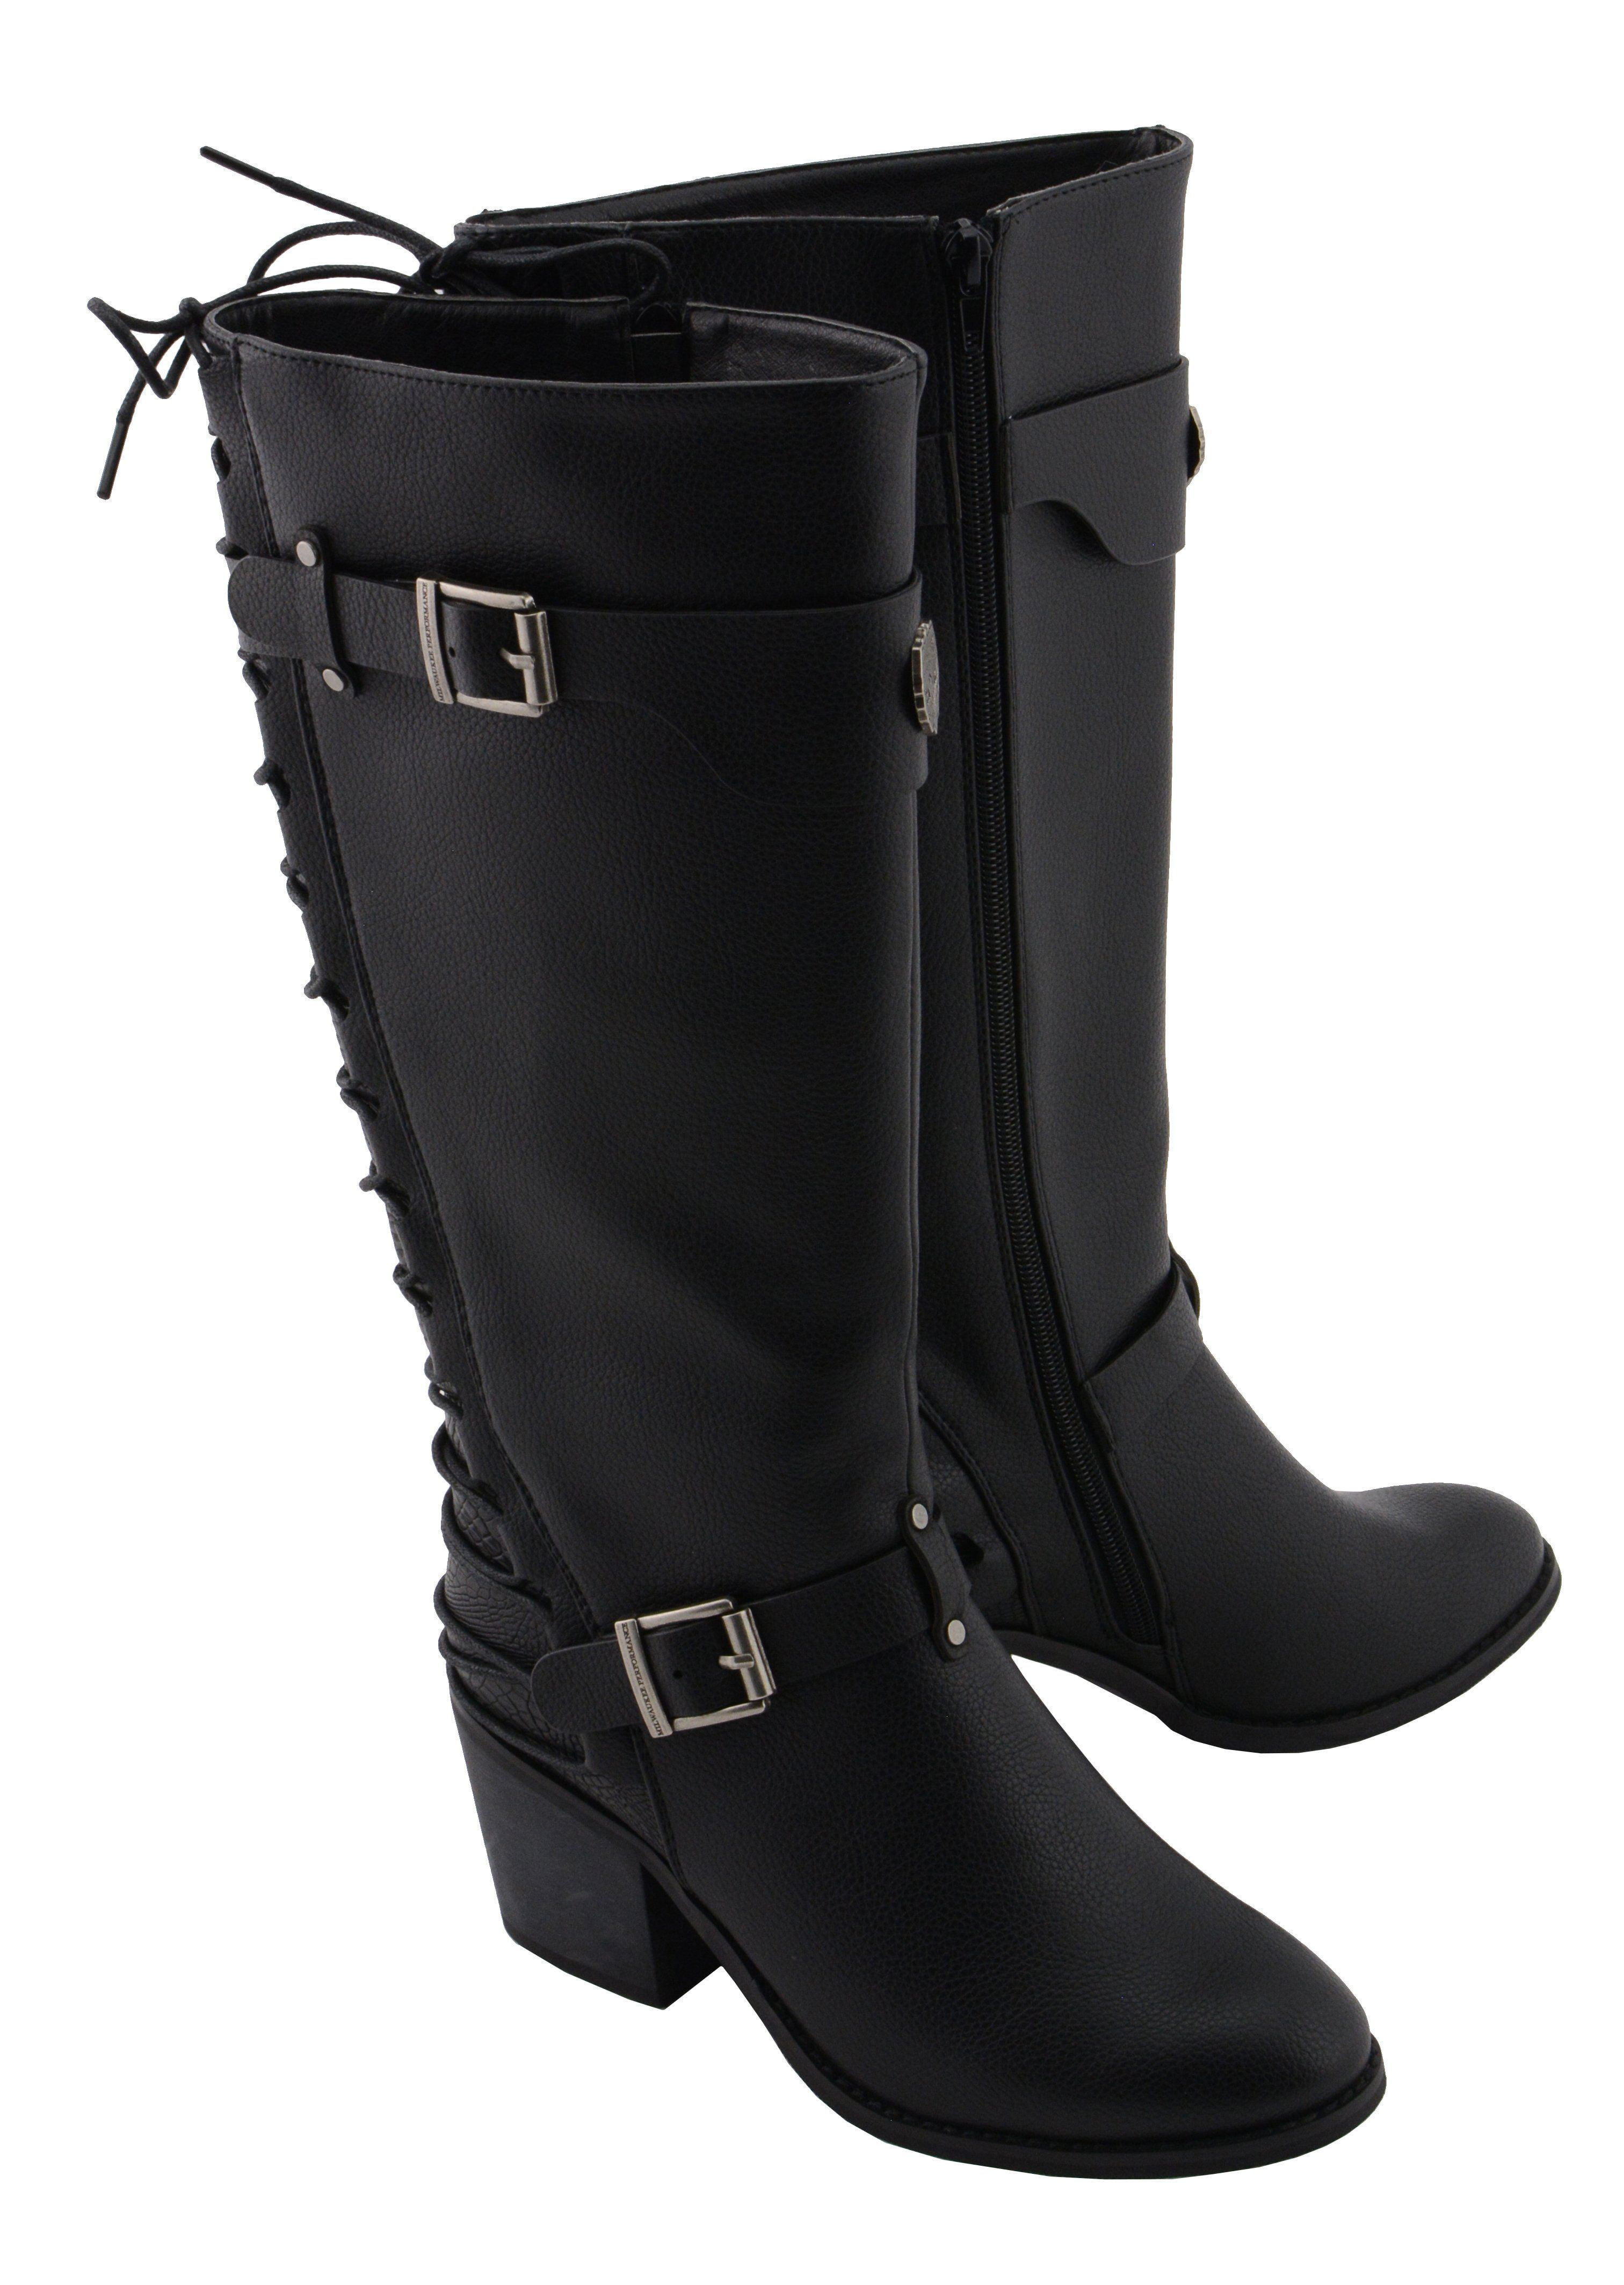 Black, Size 8.5 Milwaukee Leather Womens Tall Boots with Buckle Detail MBL9345-BLK-8.5